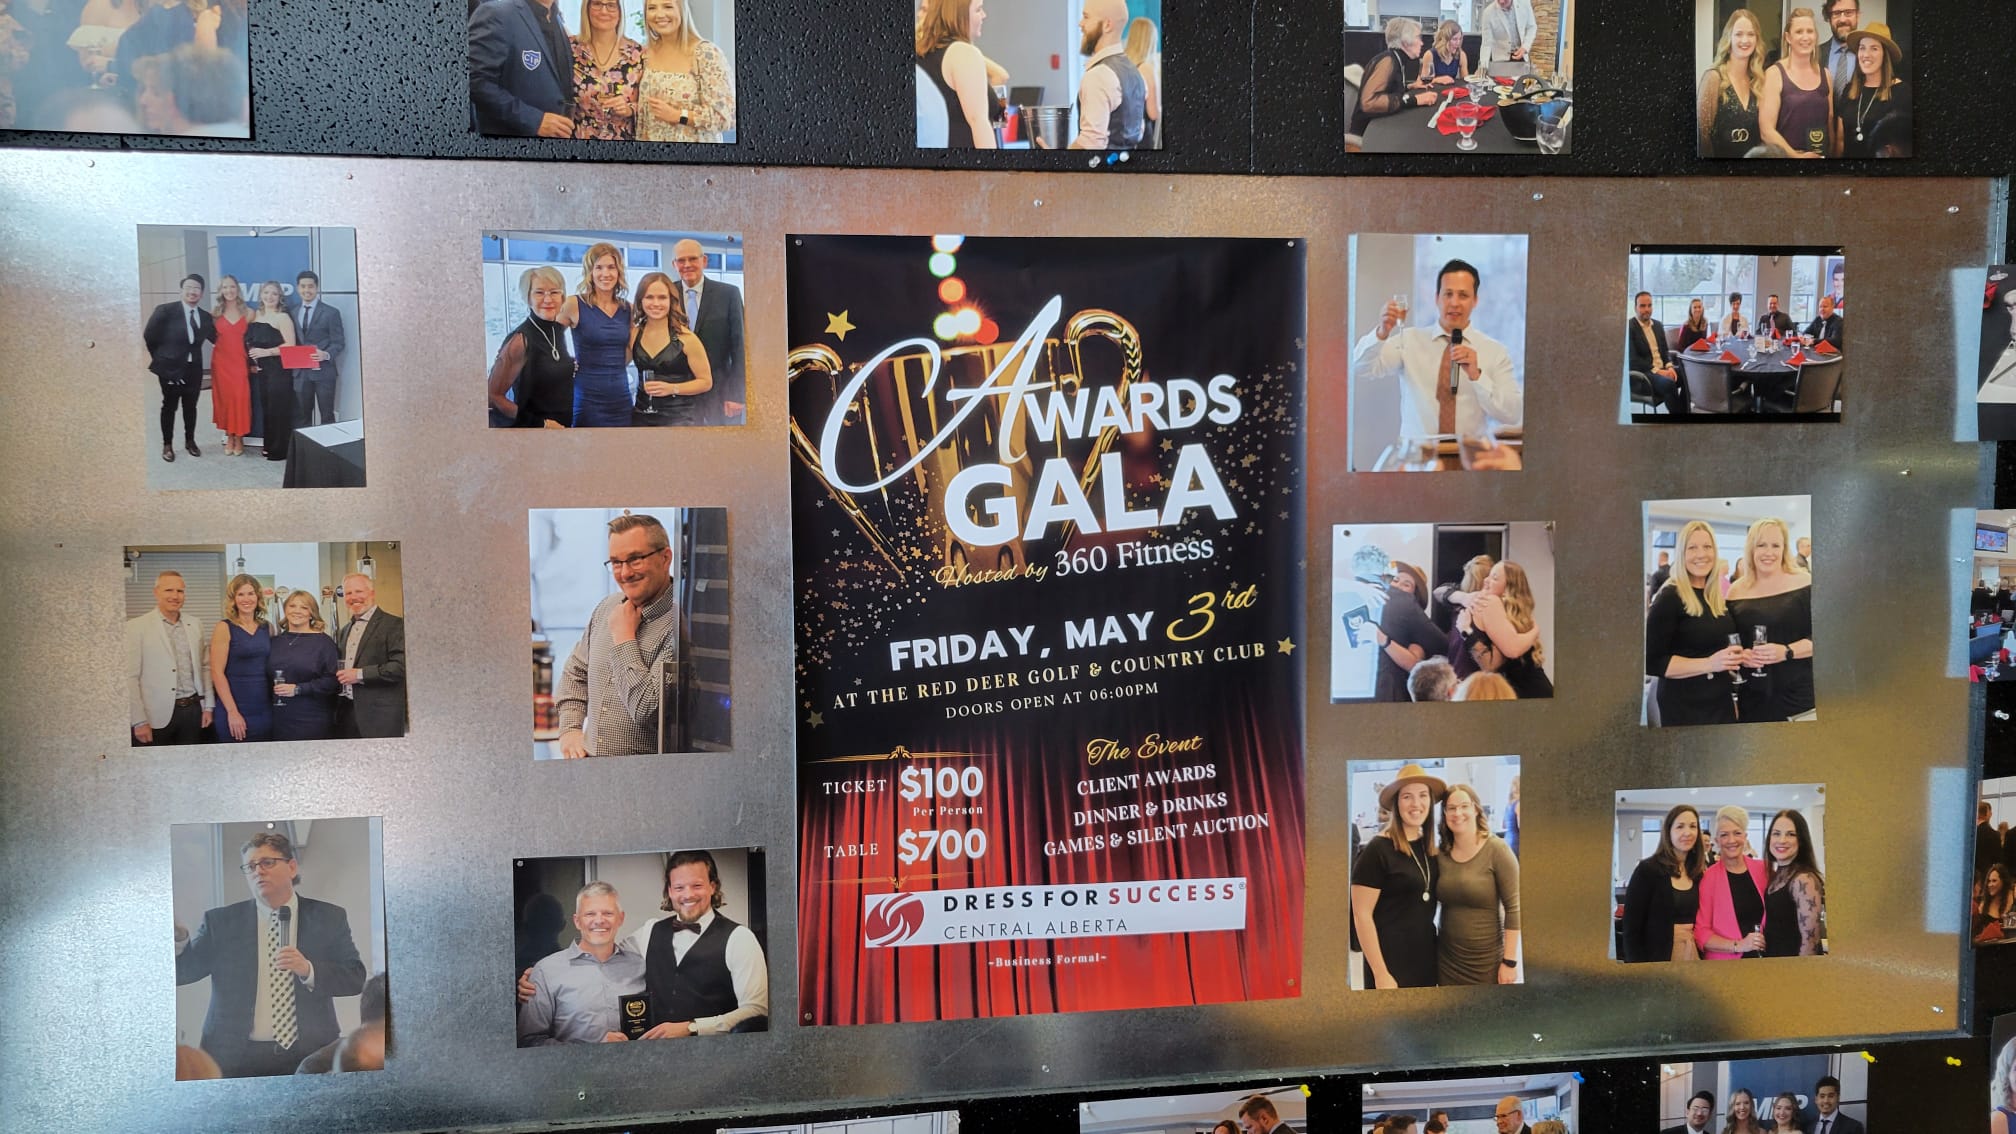 🎊You’re invited! 360 Fitness Gala & Client Awards on May 3rd!